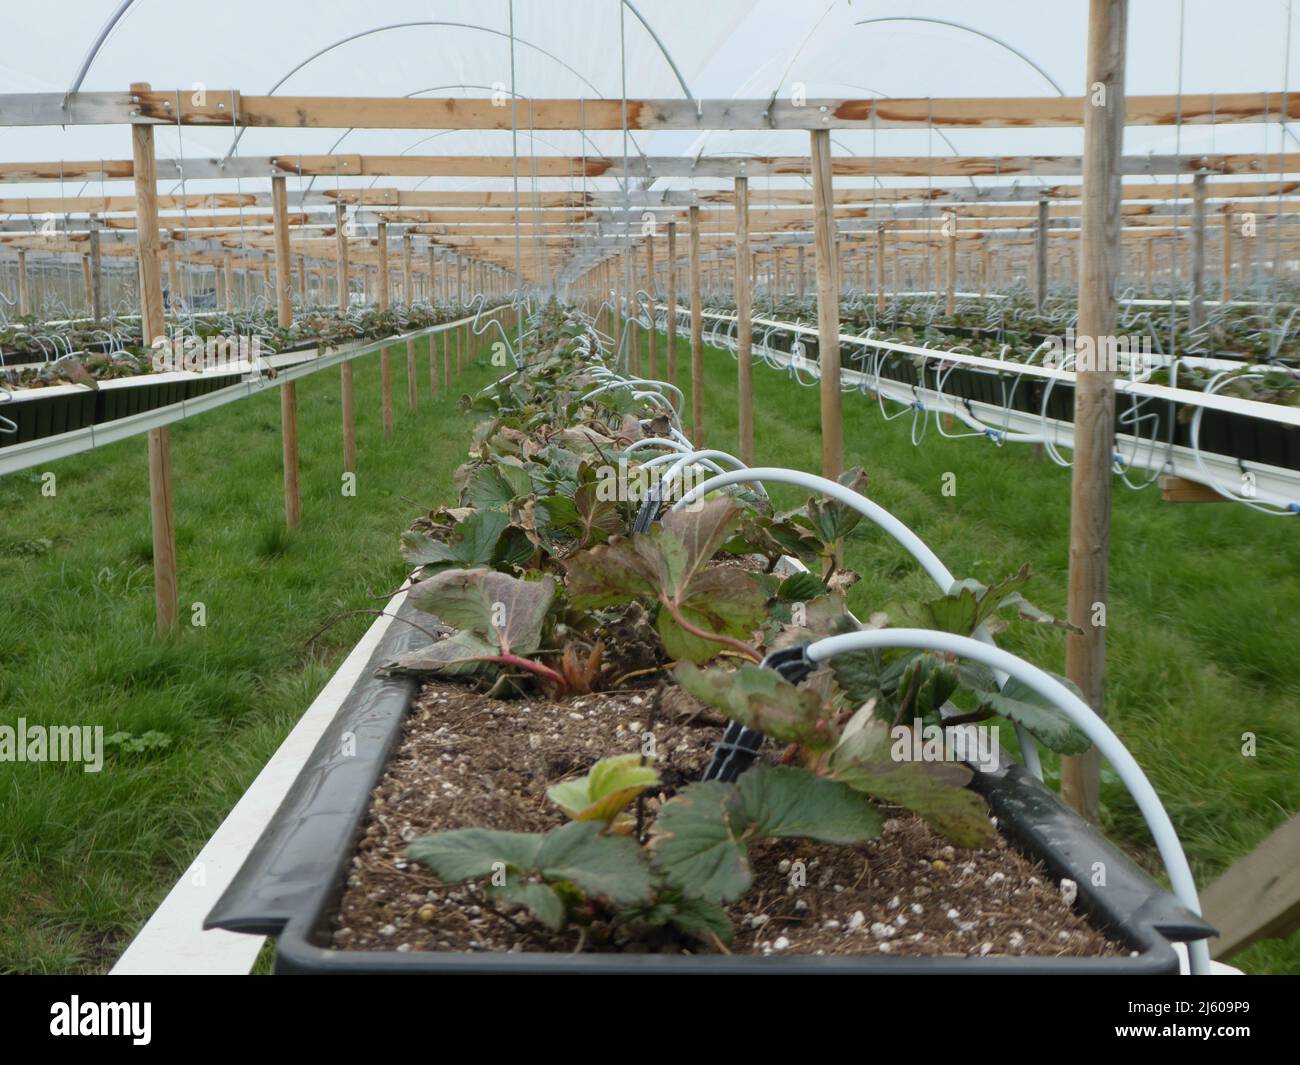 Lines of strawberries in greenhouse Stock Photo